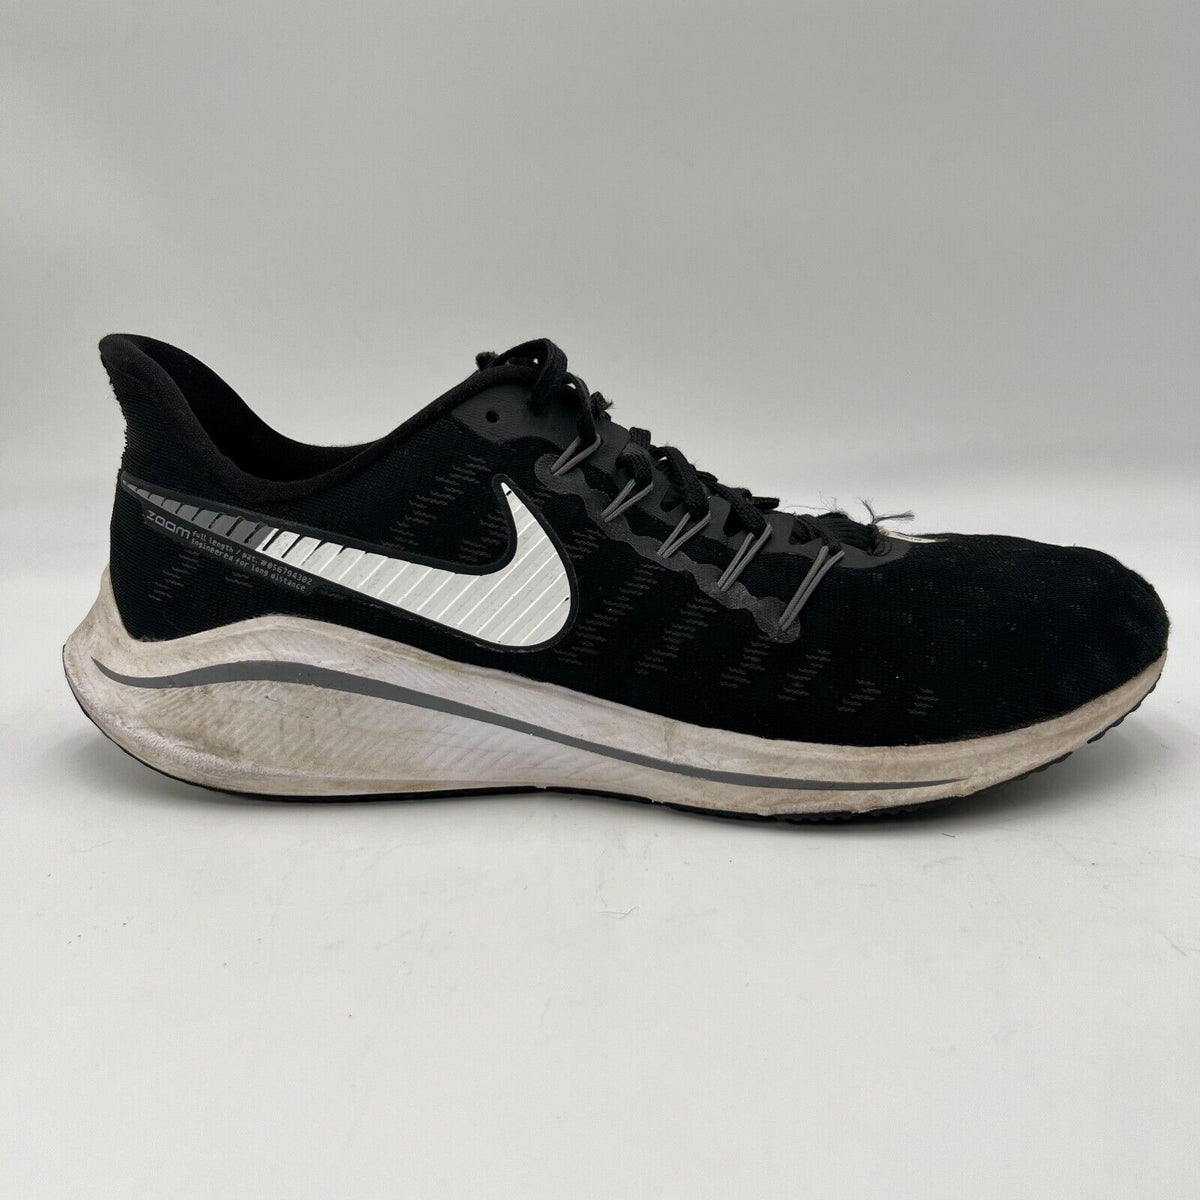 Nike Air Zoom Vomero Black White Swoosh Running Shoes Sneakers Womens Size 12